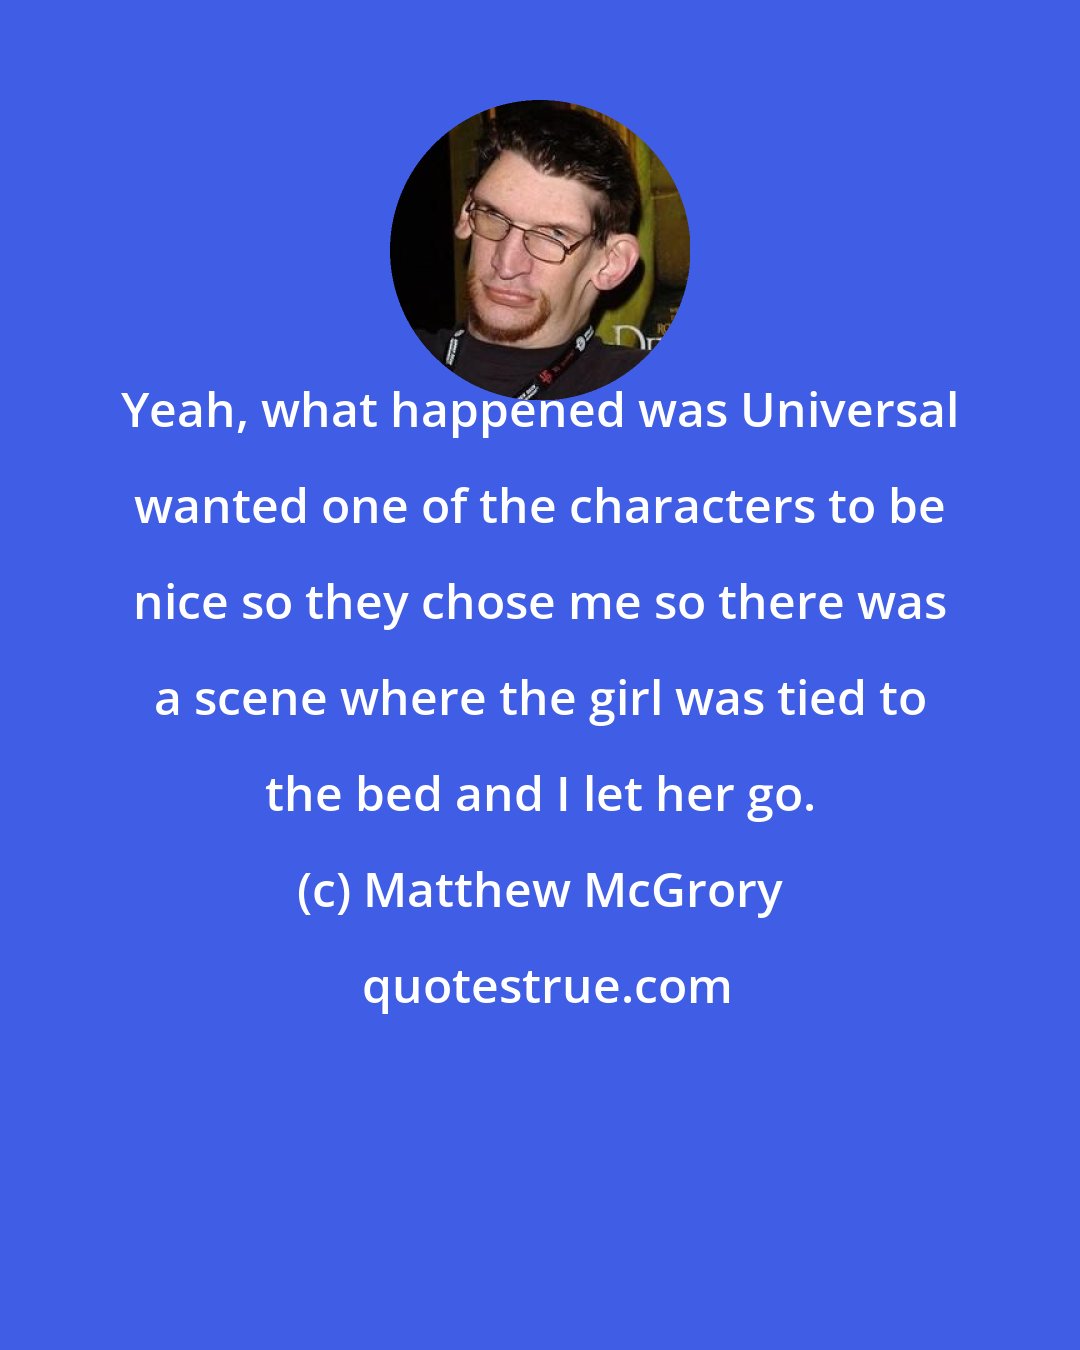 Matthew McGrory: Yeah, what happened was Universal wanted one of the characters to be nice so they chose me so there was a scene where the girl was tied to the bed and I let her go.